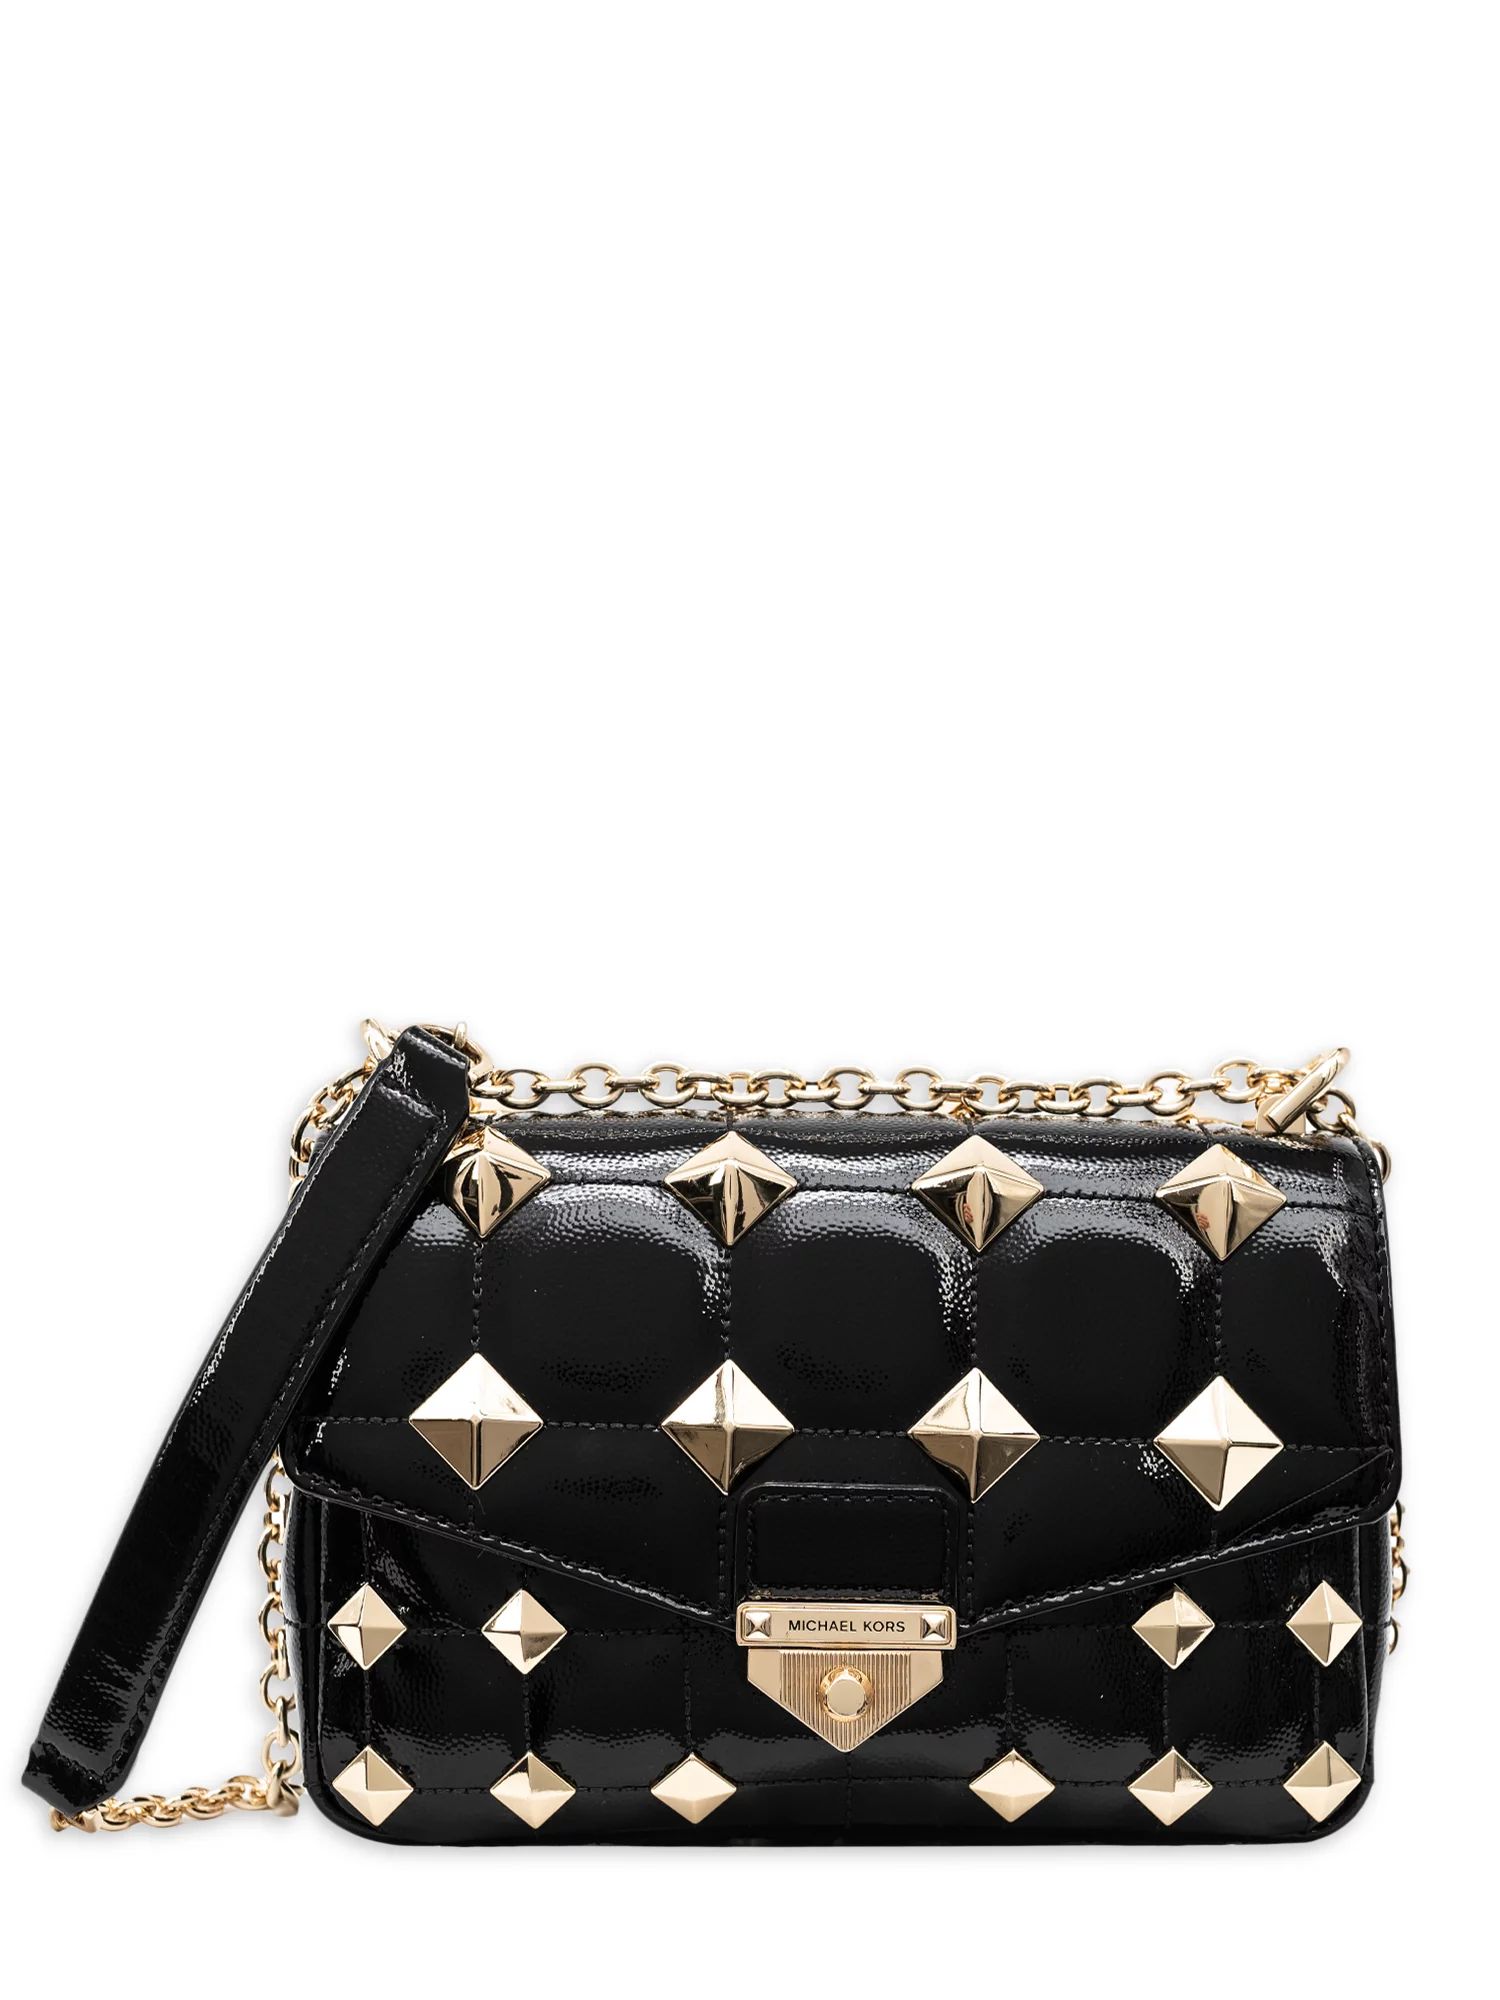 Michael Kors Ladies Soho Small Studded Quilted Patent Leather Shoulder Bag - Black | Walmart (US)